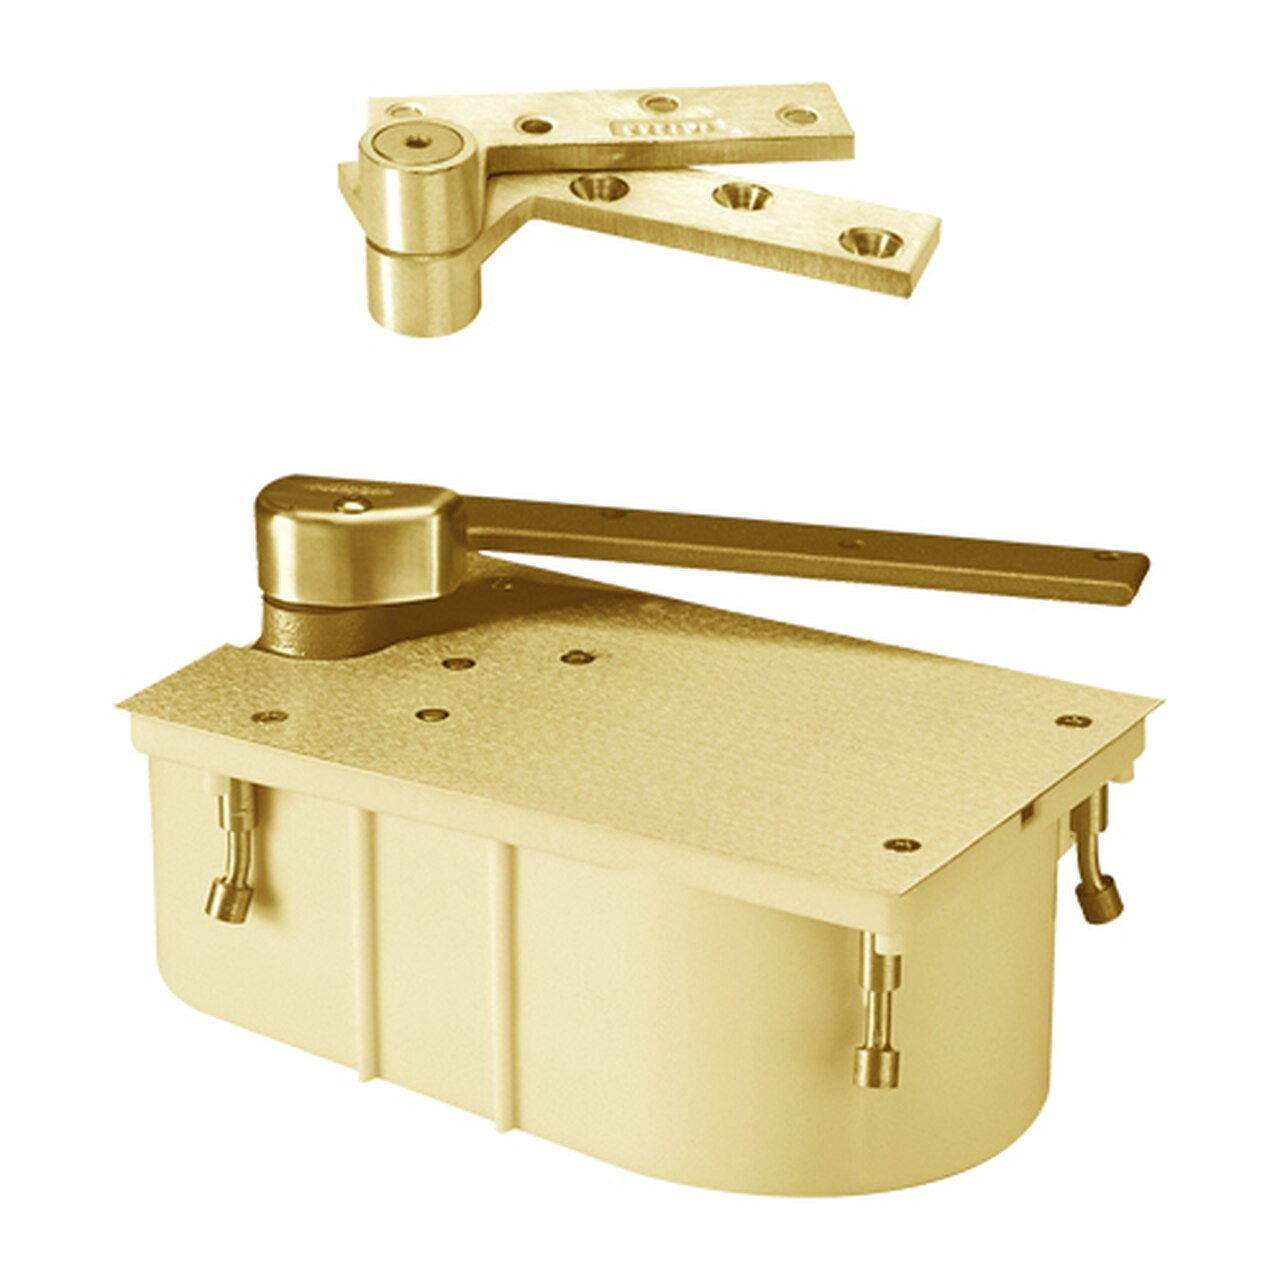 F27-95N-CWF-LH-605 Rixson 27 Series Fire Rated Heavy Duty 3/4" Offset Hung Floor Closer in Bright Brass Finish